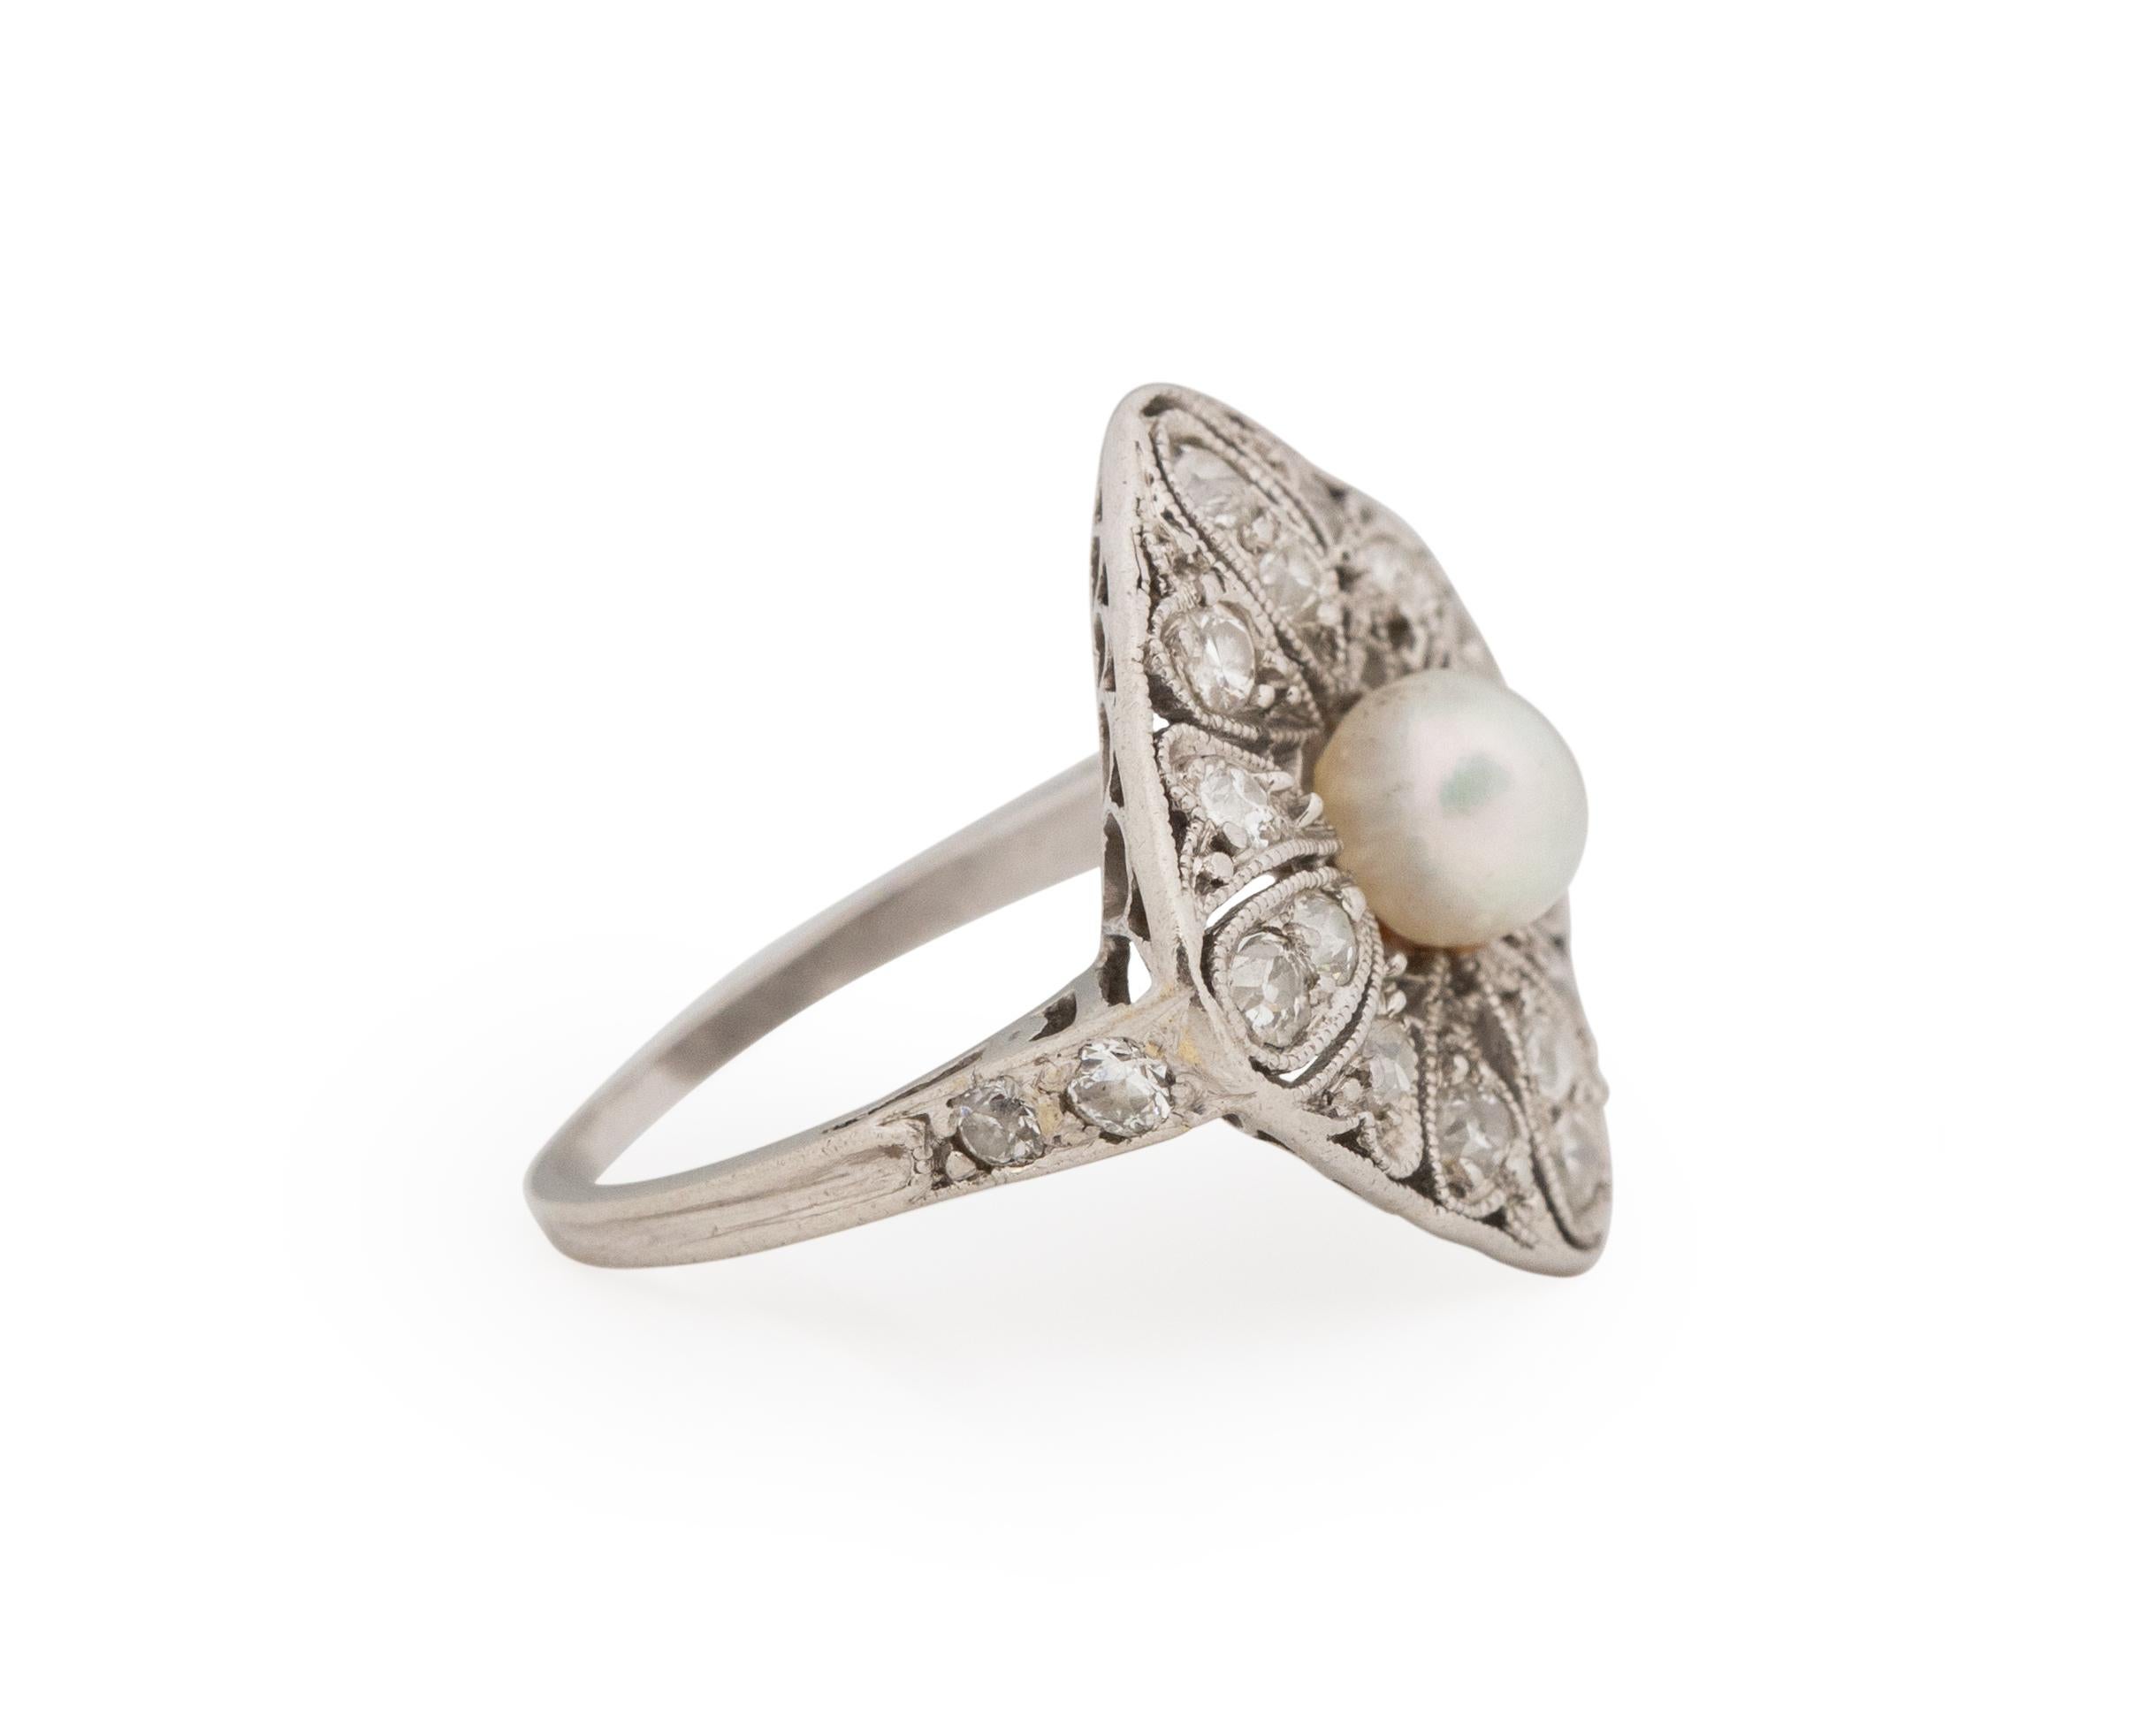 Ring Size: 3
Metal Type: Platinum [Hallmarked, and Tested]
Weight: 2.0 grams

Diamond Details:
Weight: .35carat, total
Cut: Old European brilliant
Color: G-H
Clarity: SI

Pearl Detail: Natural, Round, Pinkish-White, .50ct

Finger to Top of Stone